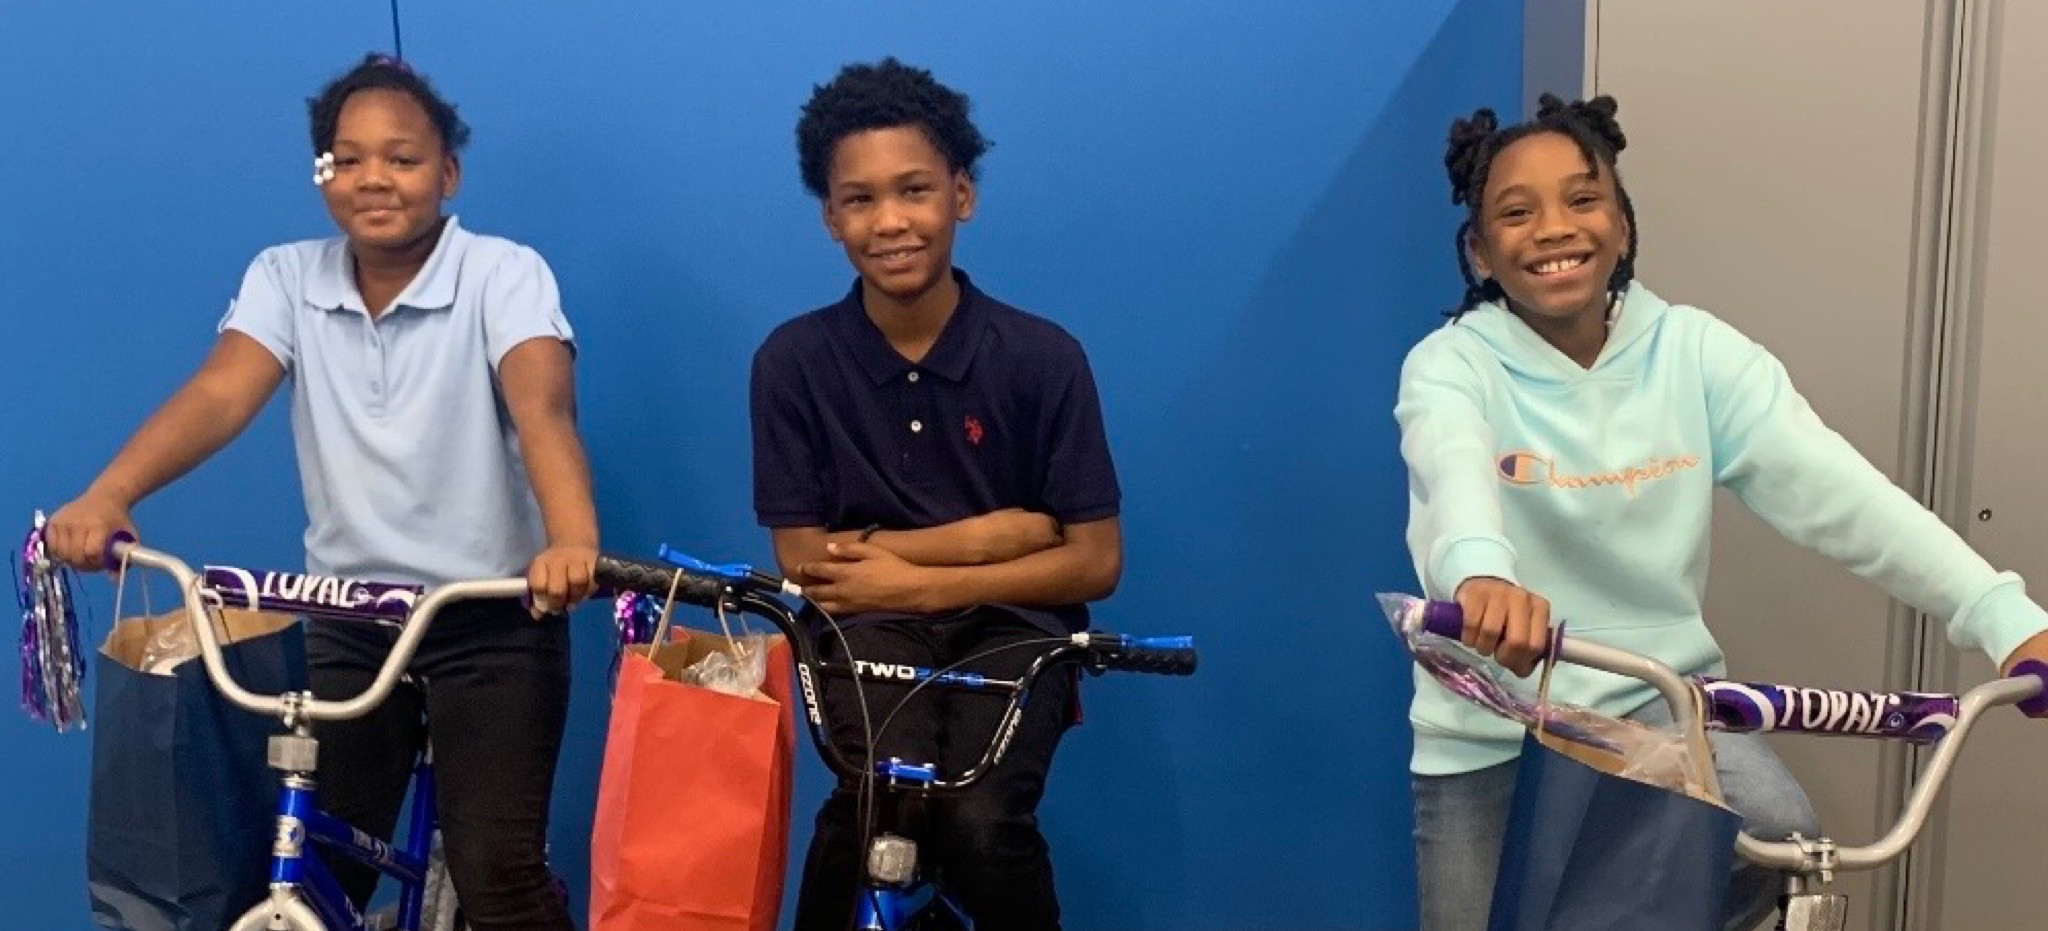 look-at-these-happy-faces!!-these-are-the-kids-that-received-the-bicycles-from-our-community-event-at-the-ldp-summit.JPG